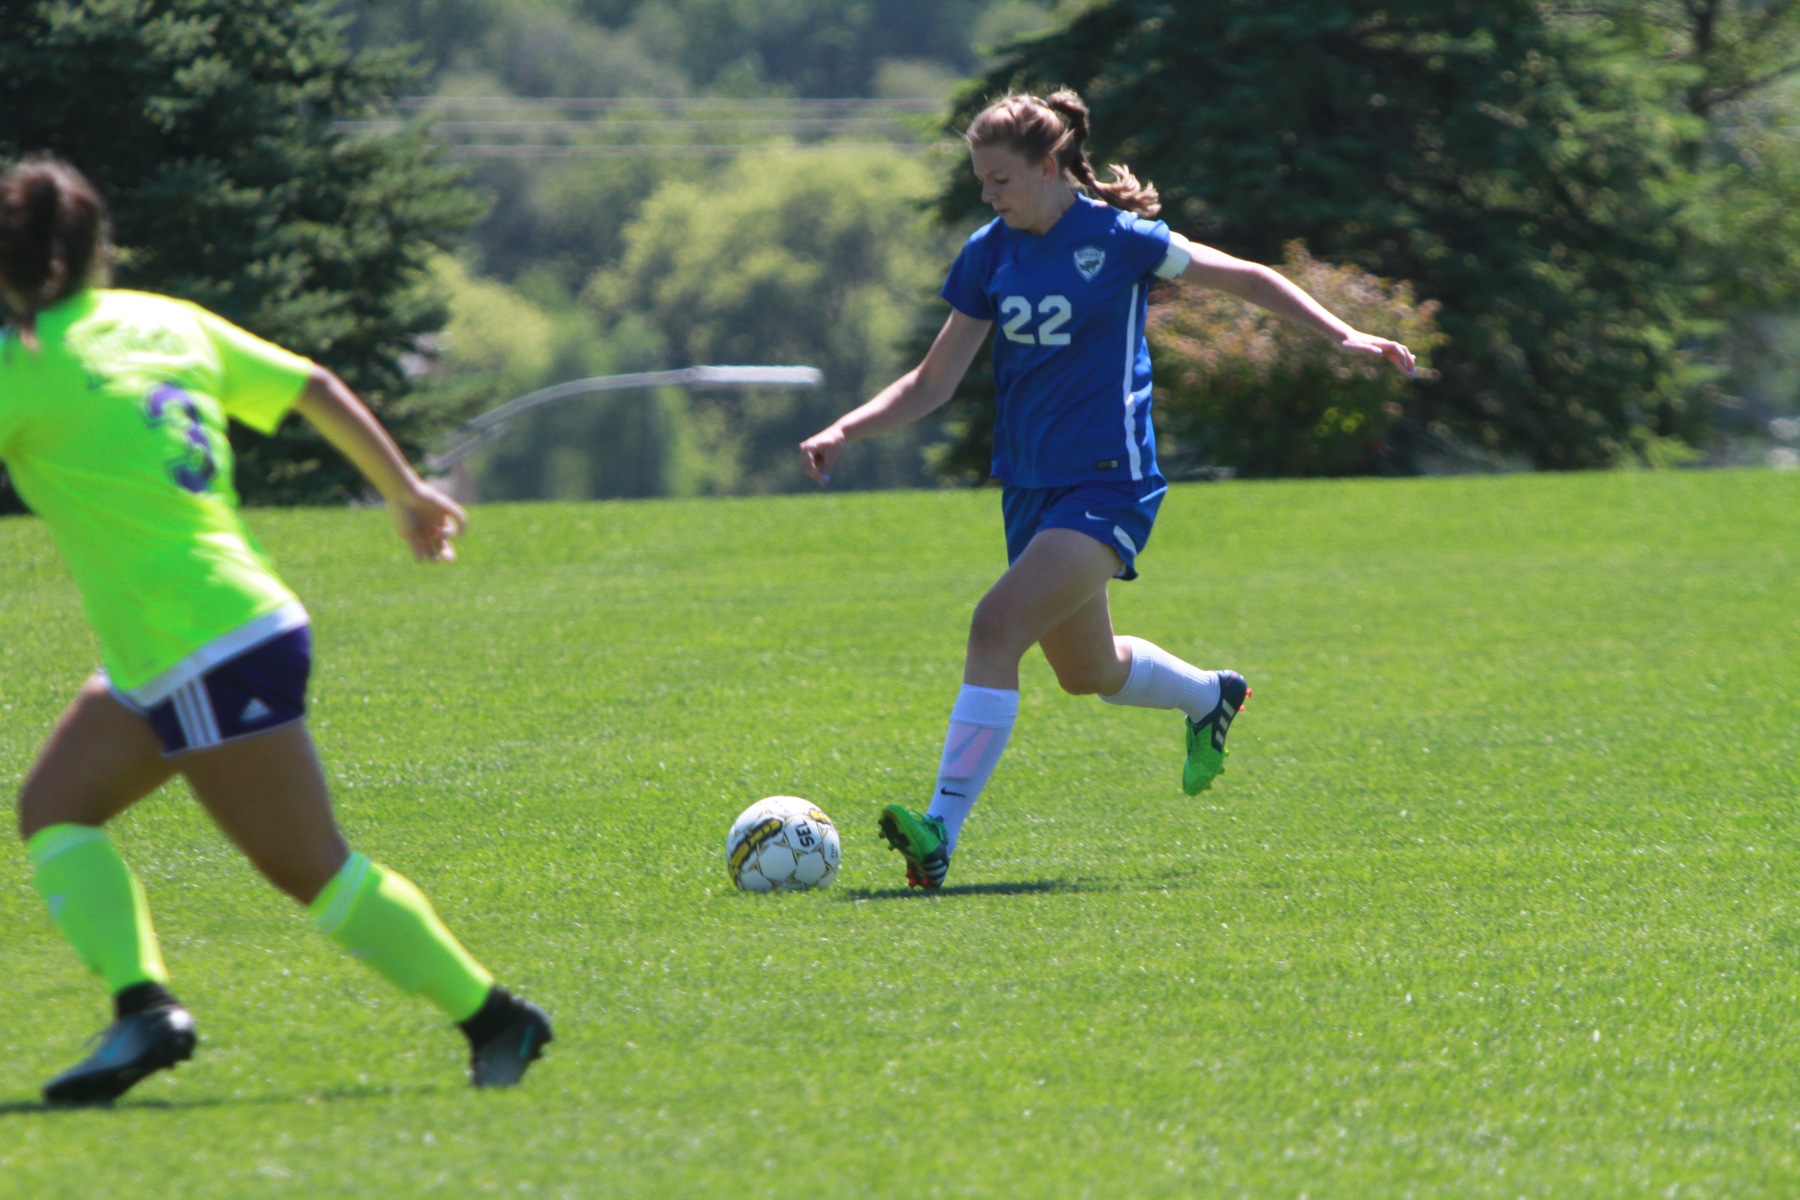 Sophomore defender, Kate Reddish, looks to connect a pass with a midfielder.